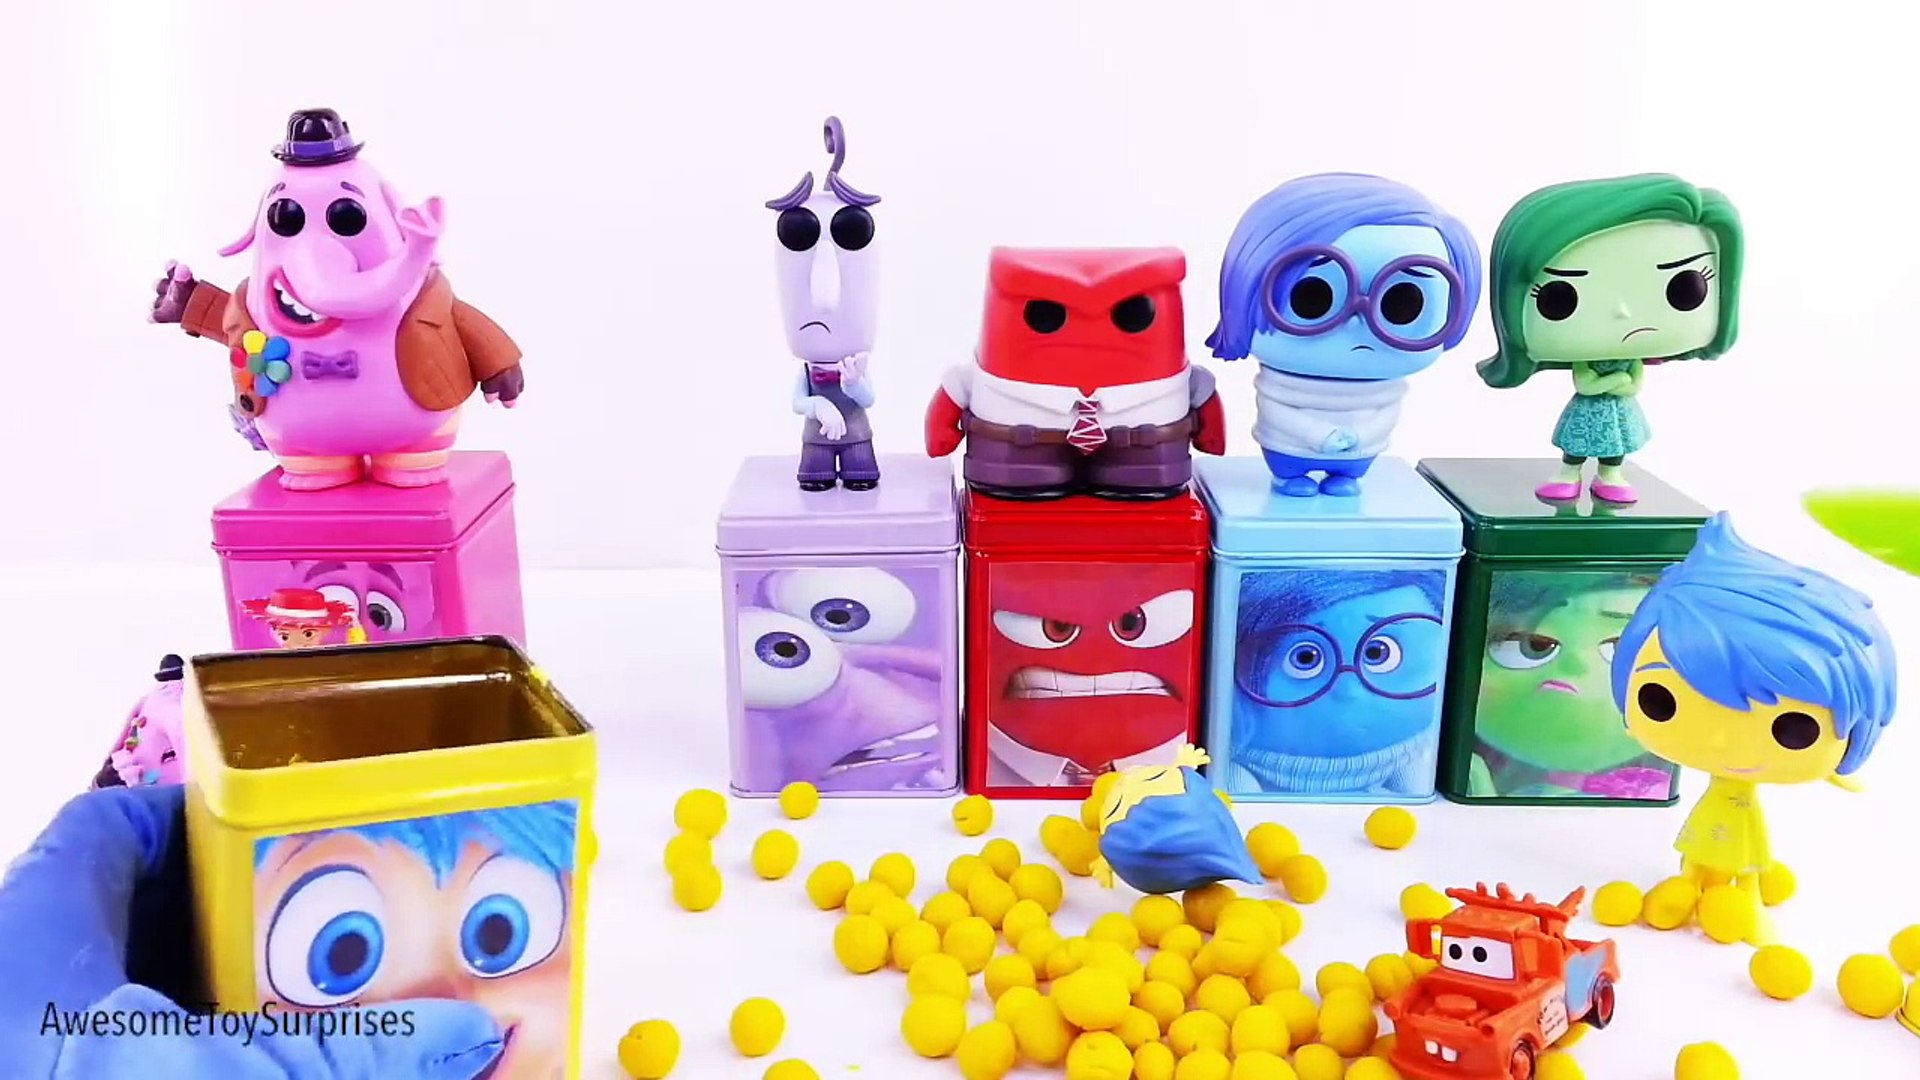 Disney Pixar Inside Out DIY Cubeez Funko Pop Toys Surprise Eggs Playdoh  Dippin Dots Learn Colors! – Видео Dailymotion